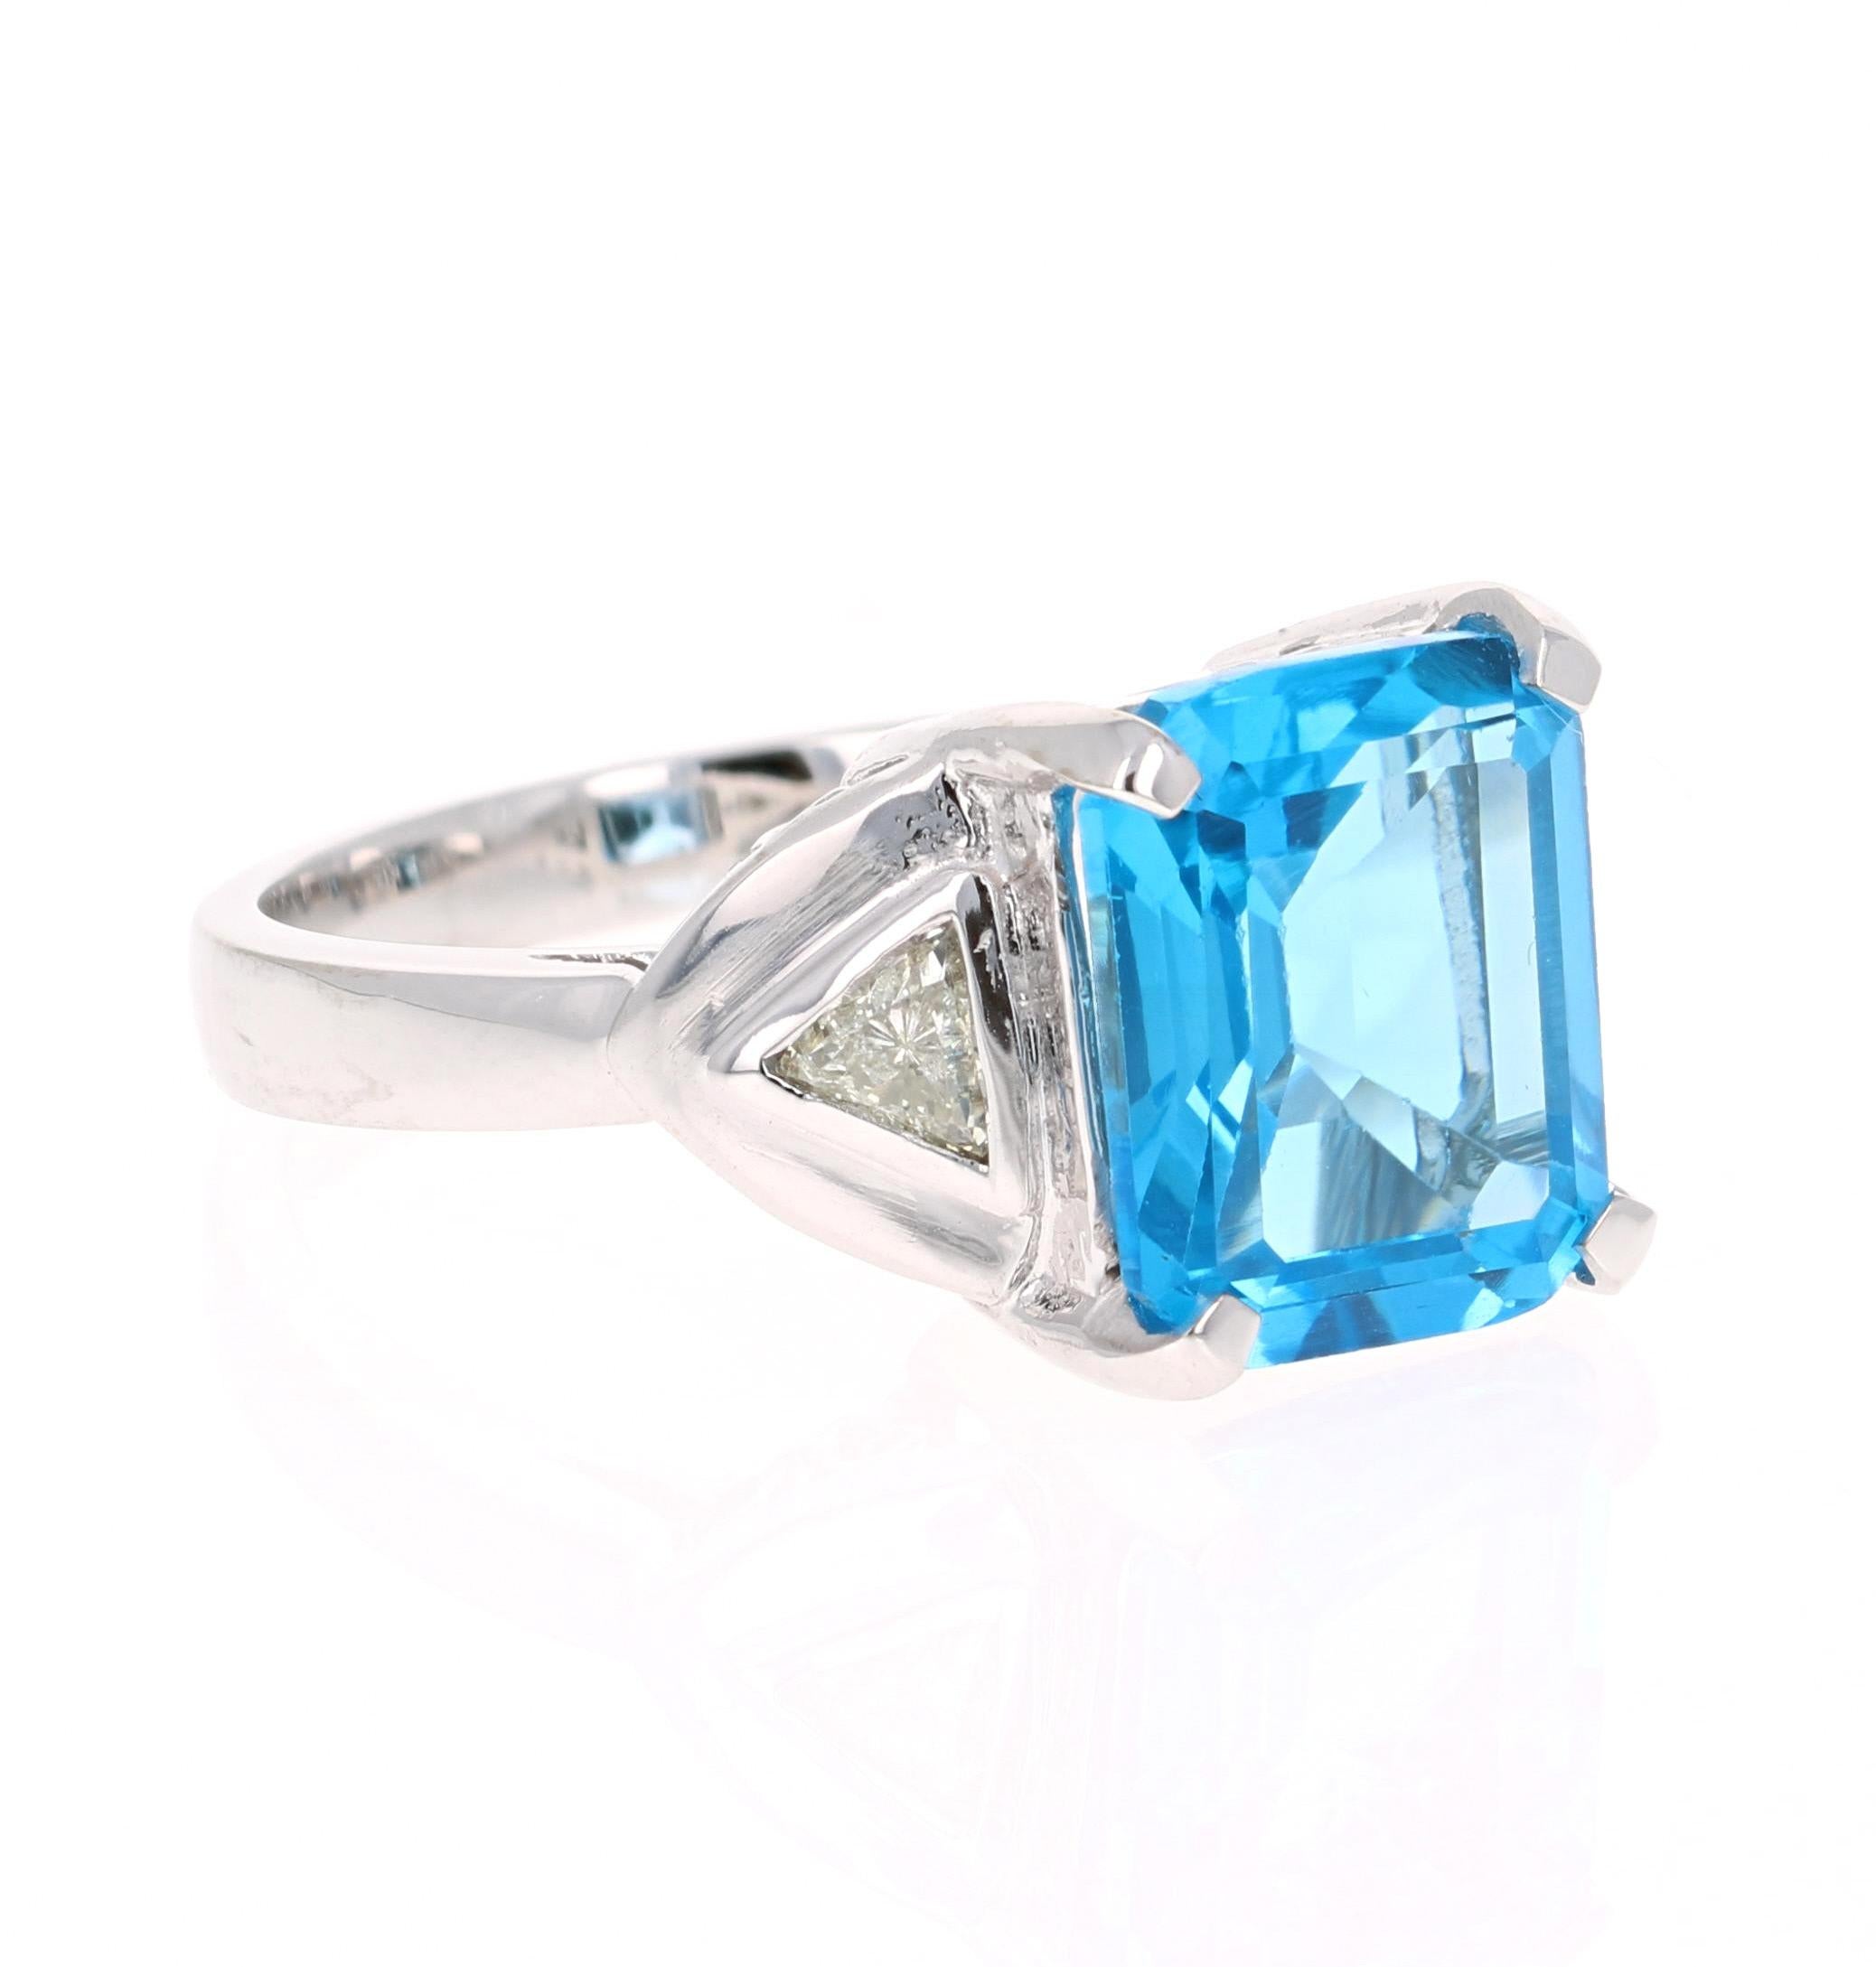 This beautiful Emerald cut Blue Topaz and Diamond ring has a stunningly large Blue Topaz that weighs 6.55 Carats. It is surrounded by 2 Trillion Cut Diamonds that weigh 0.39 Carats. The total carat weight of the ring is 6.94 Carats. 
The ring is